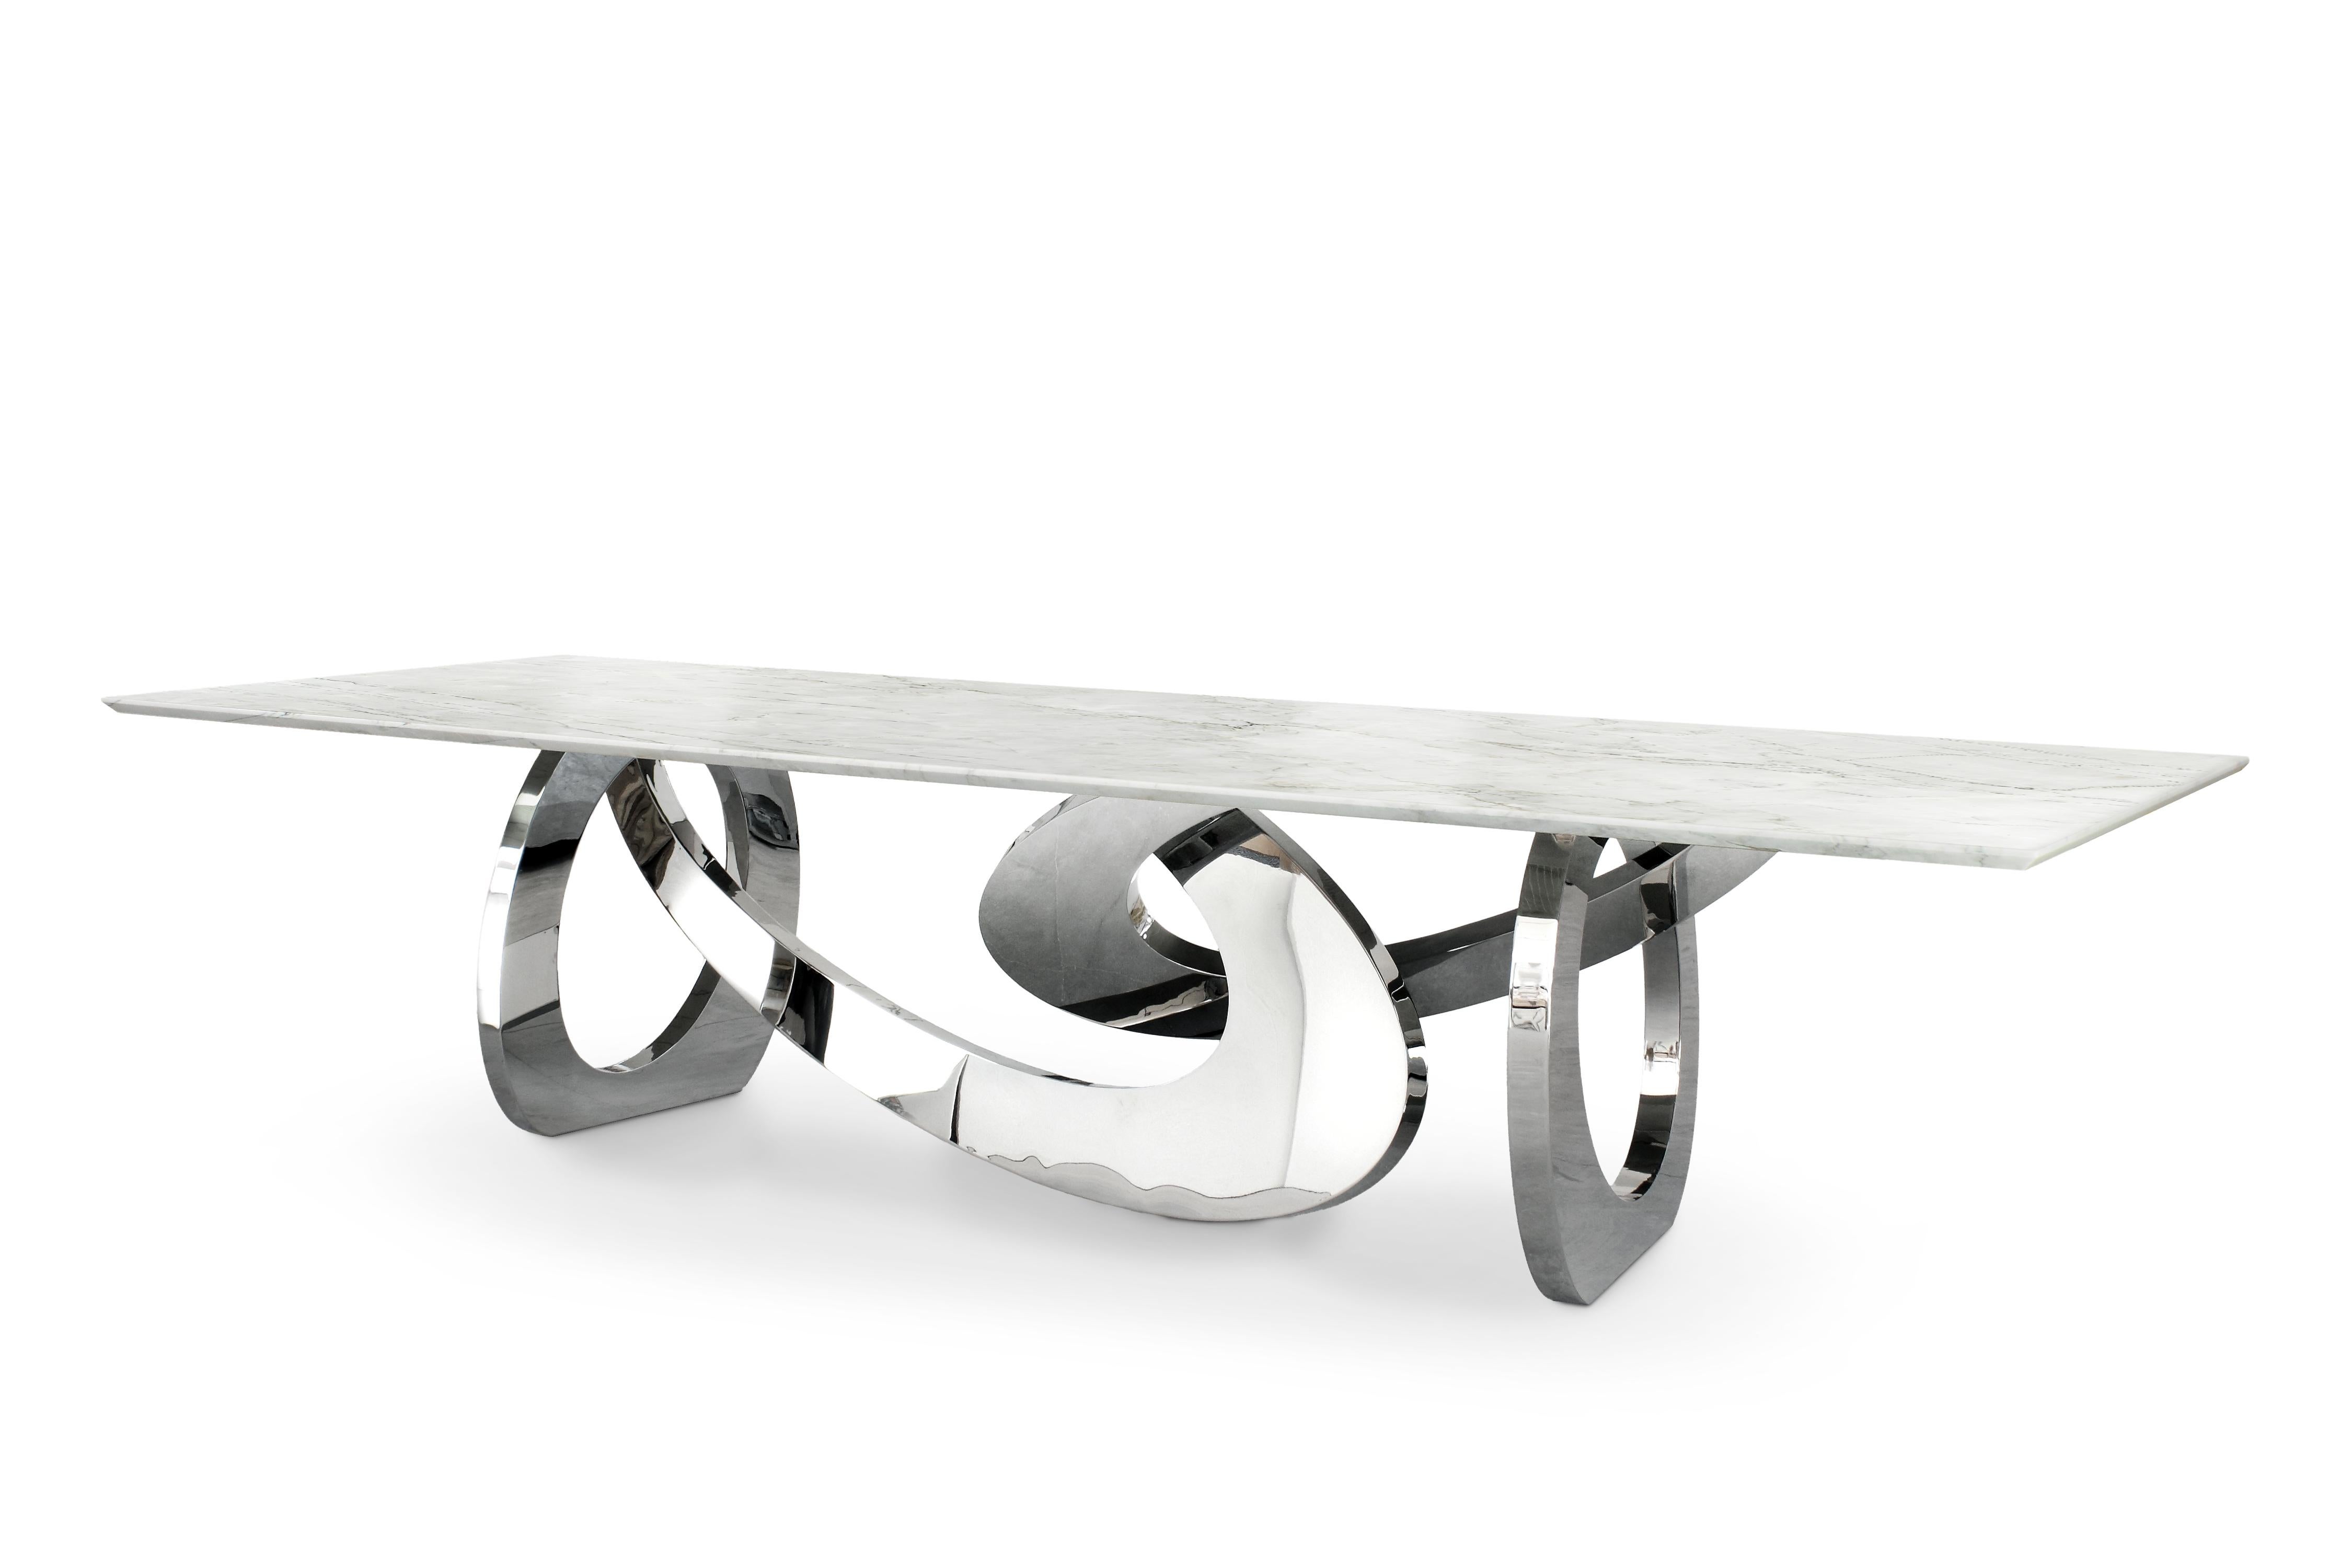 The table 'Bangles' is an important scultural dining table with structure in mirror polished stainless steel and top in Tahiti quartzite (Origin: Brazil). Every single bangle is welded and highly polished by hand. The mirror-like finishing of the